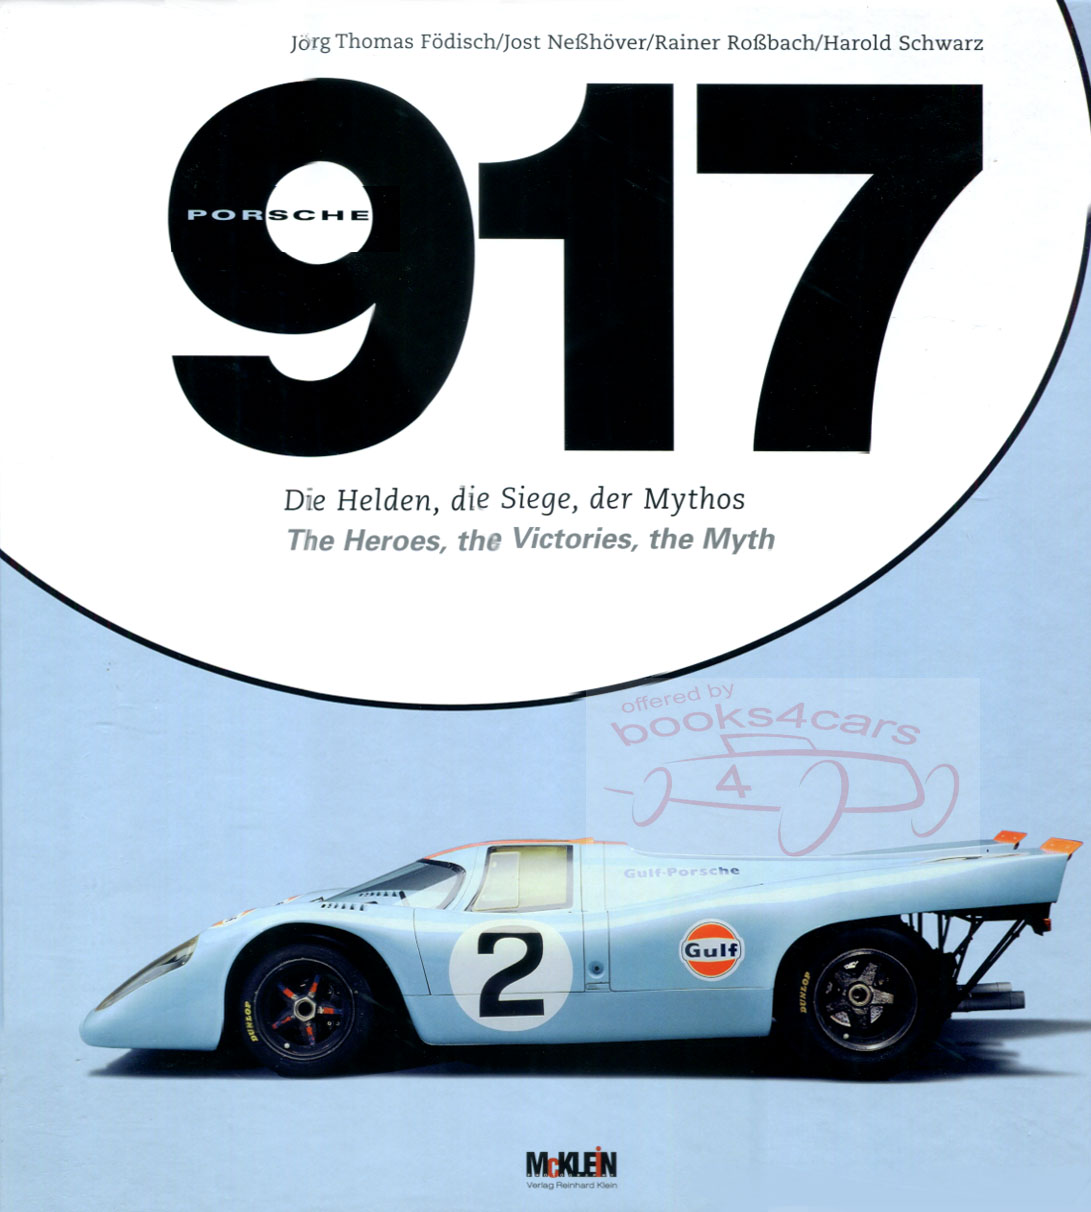 Porsche 917 the Heroes the Victories the Myth by Fodisch Nesshover Rossbach & Schwarz 264 pages oversized Hardcover